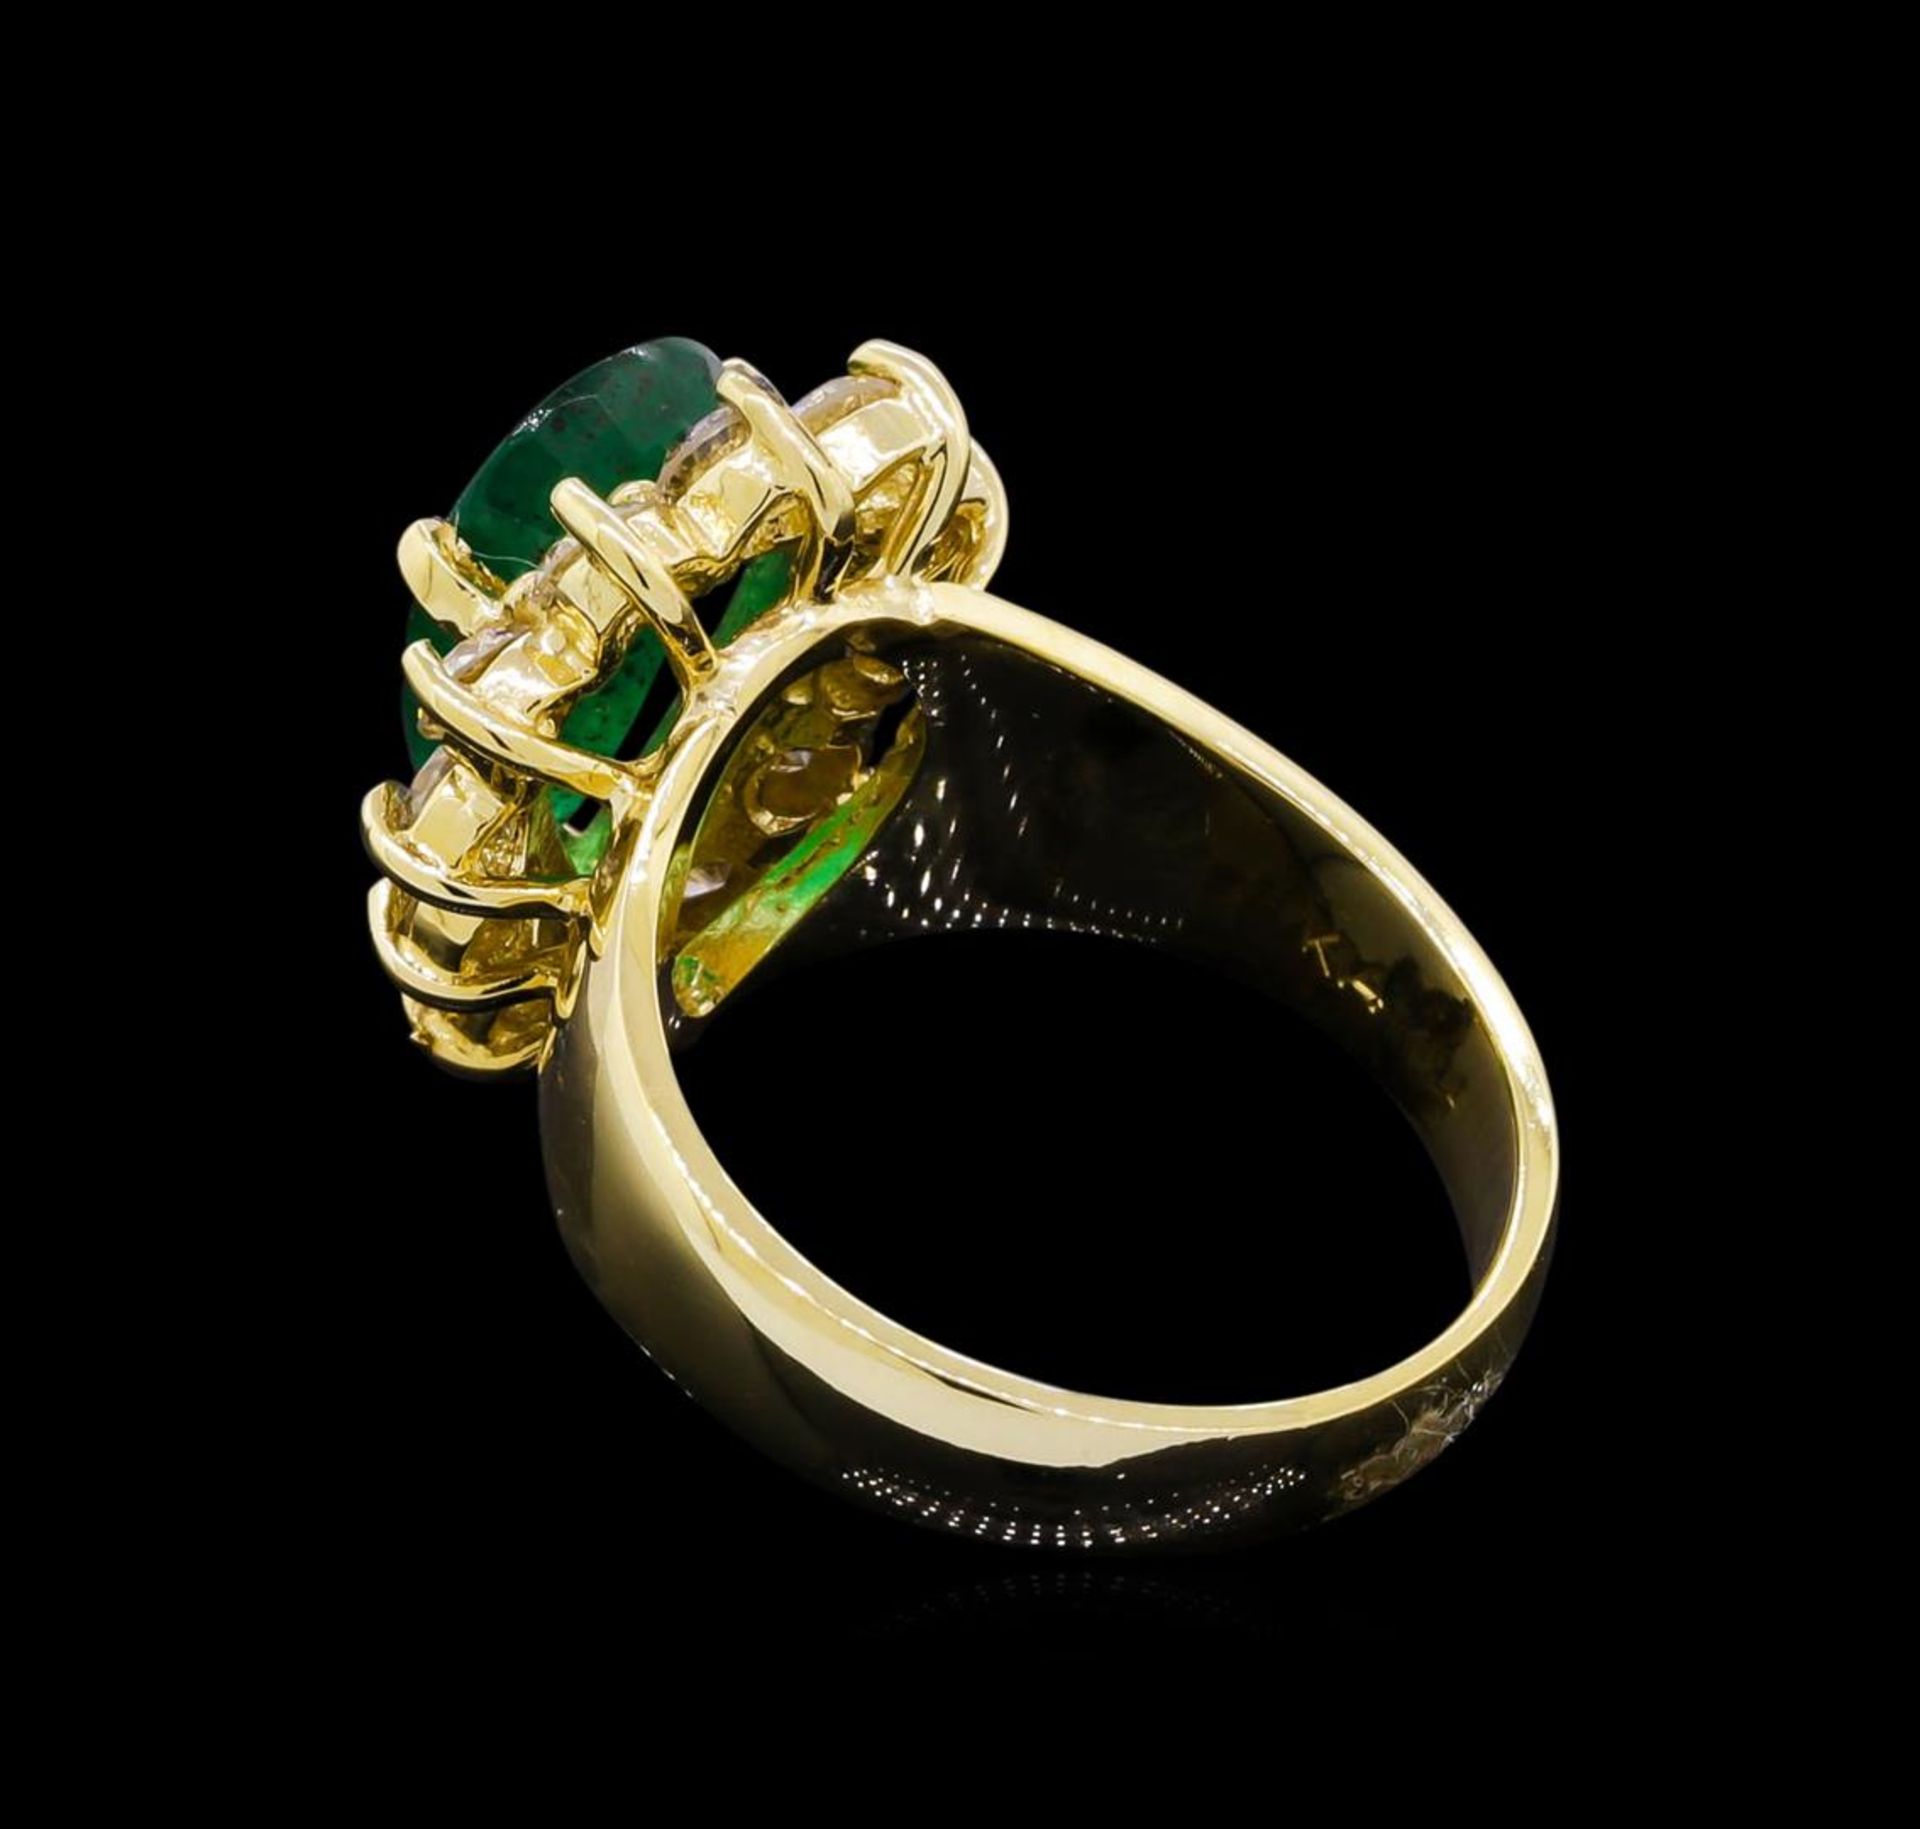 14KT Yellow Gold 2.48 ctw Emerald and Diamond Ring - Image 3 of 5